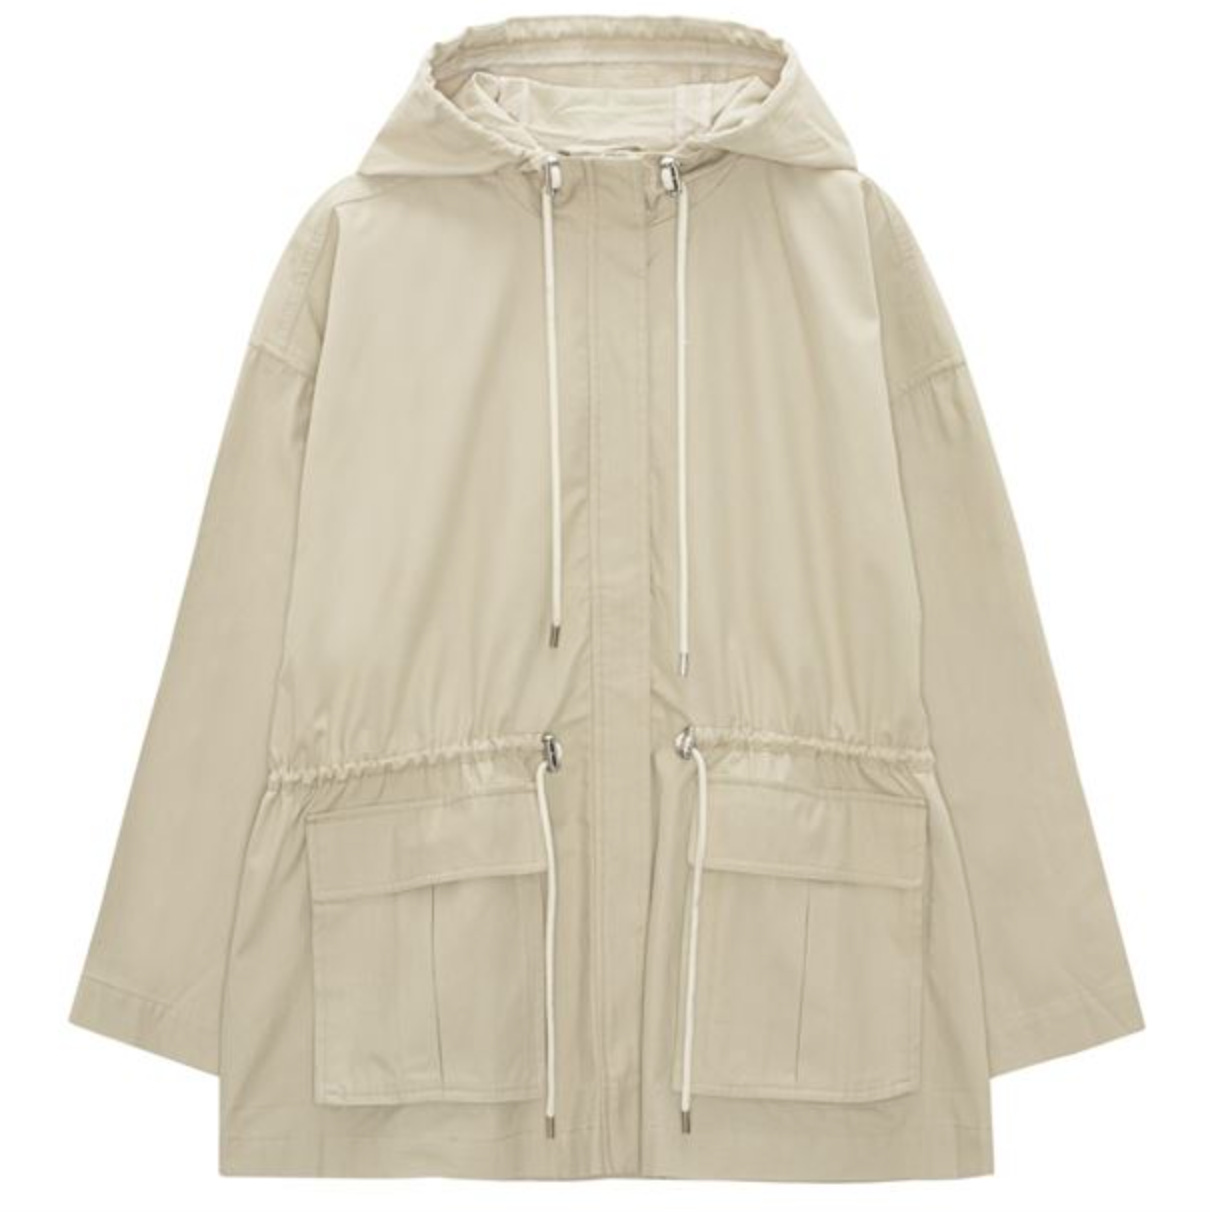 The best spring coat is parka a shell